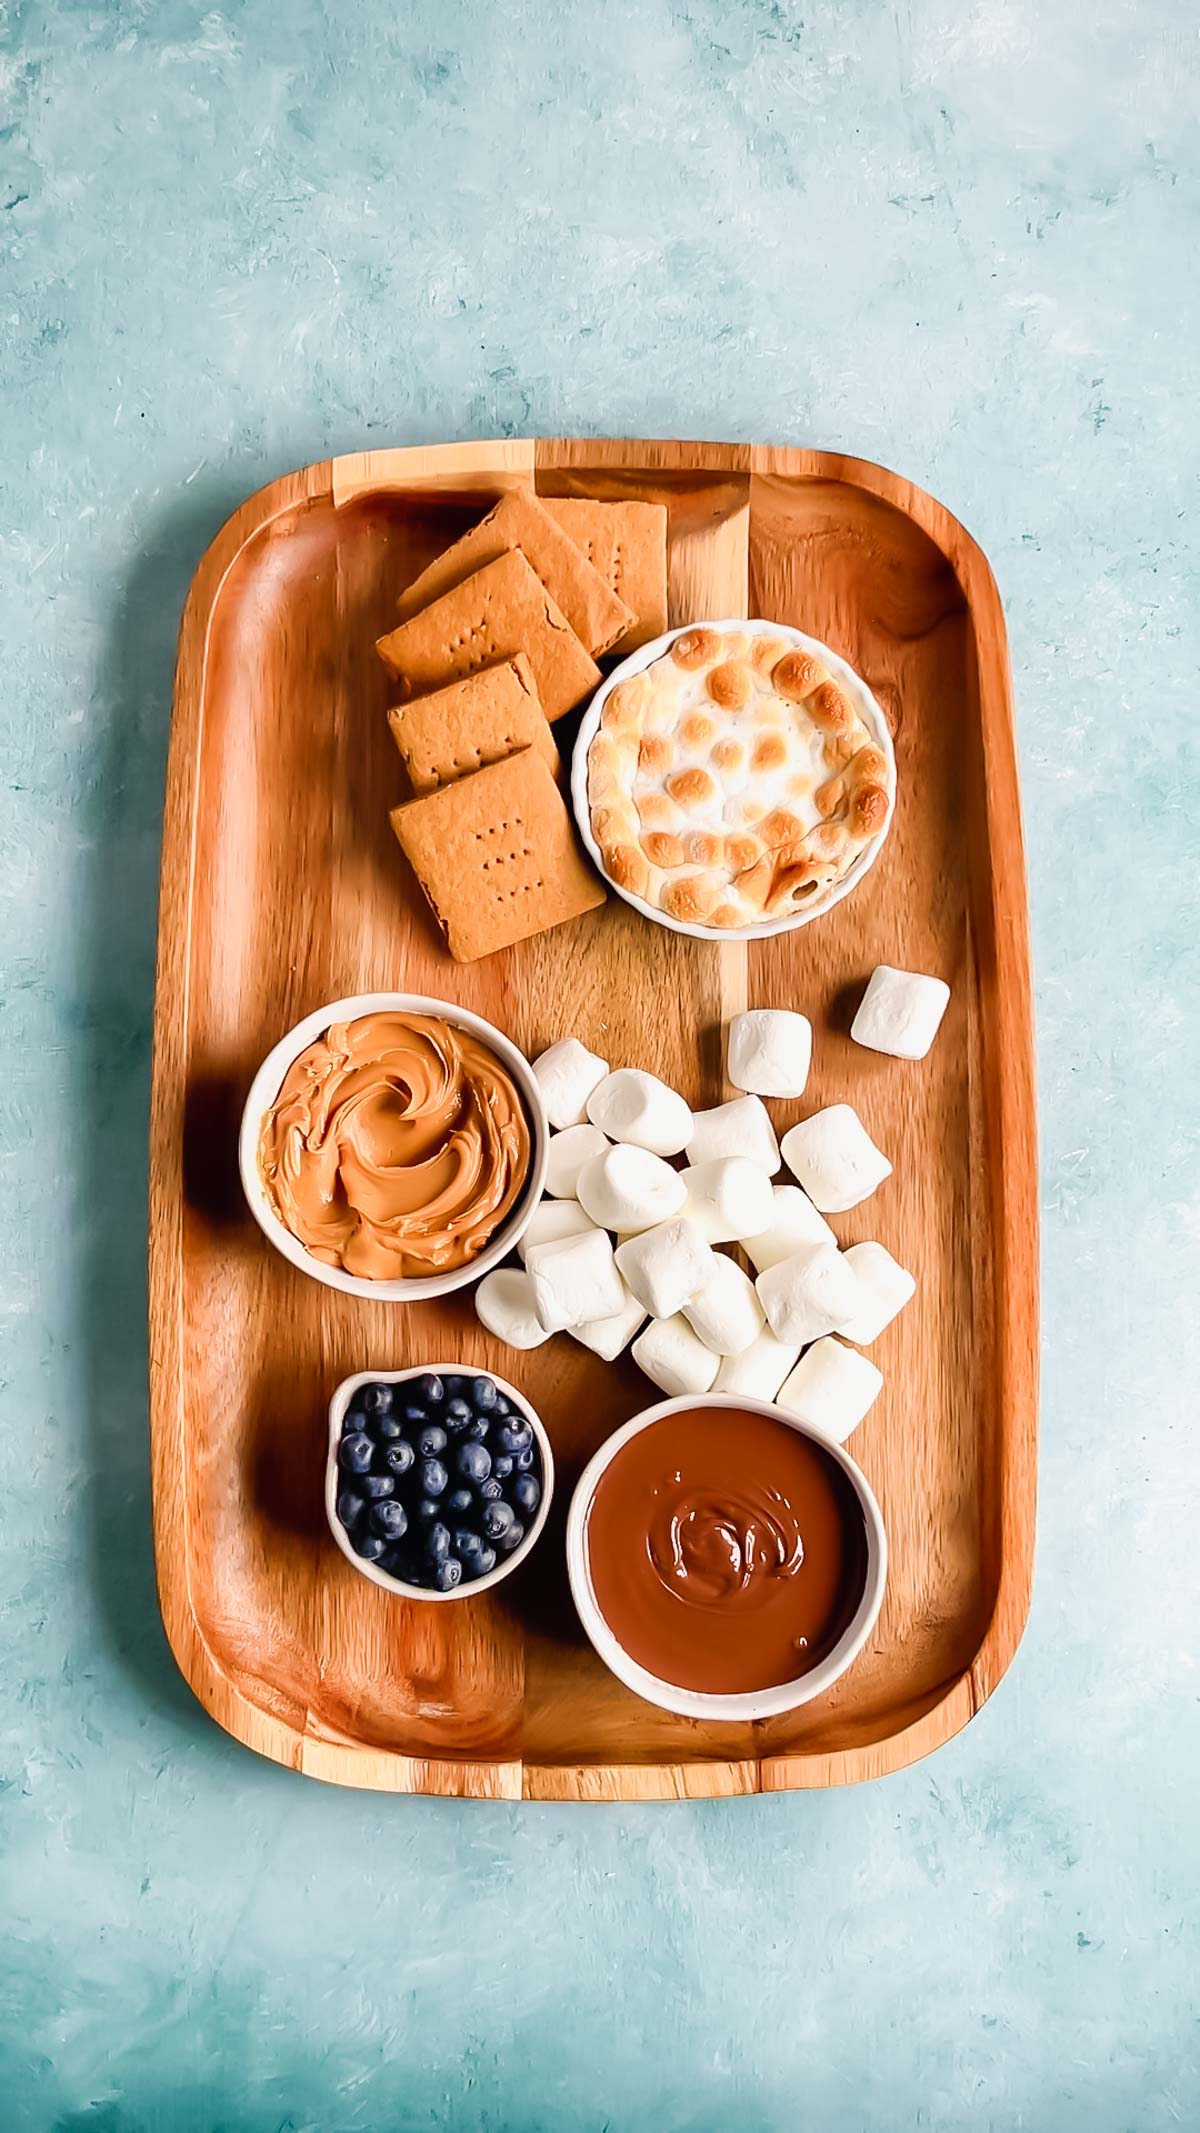 A large wooden rectangular chacuterie board with marshmallows, graham crackers, and bowls of nutella, s'mores dip, peanut butter, and blueberries.